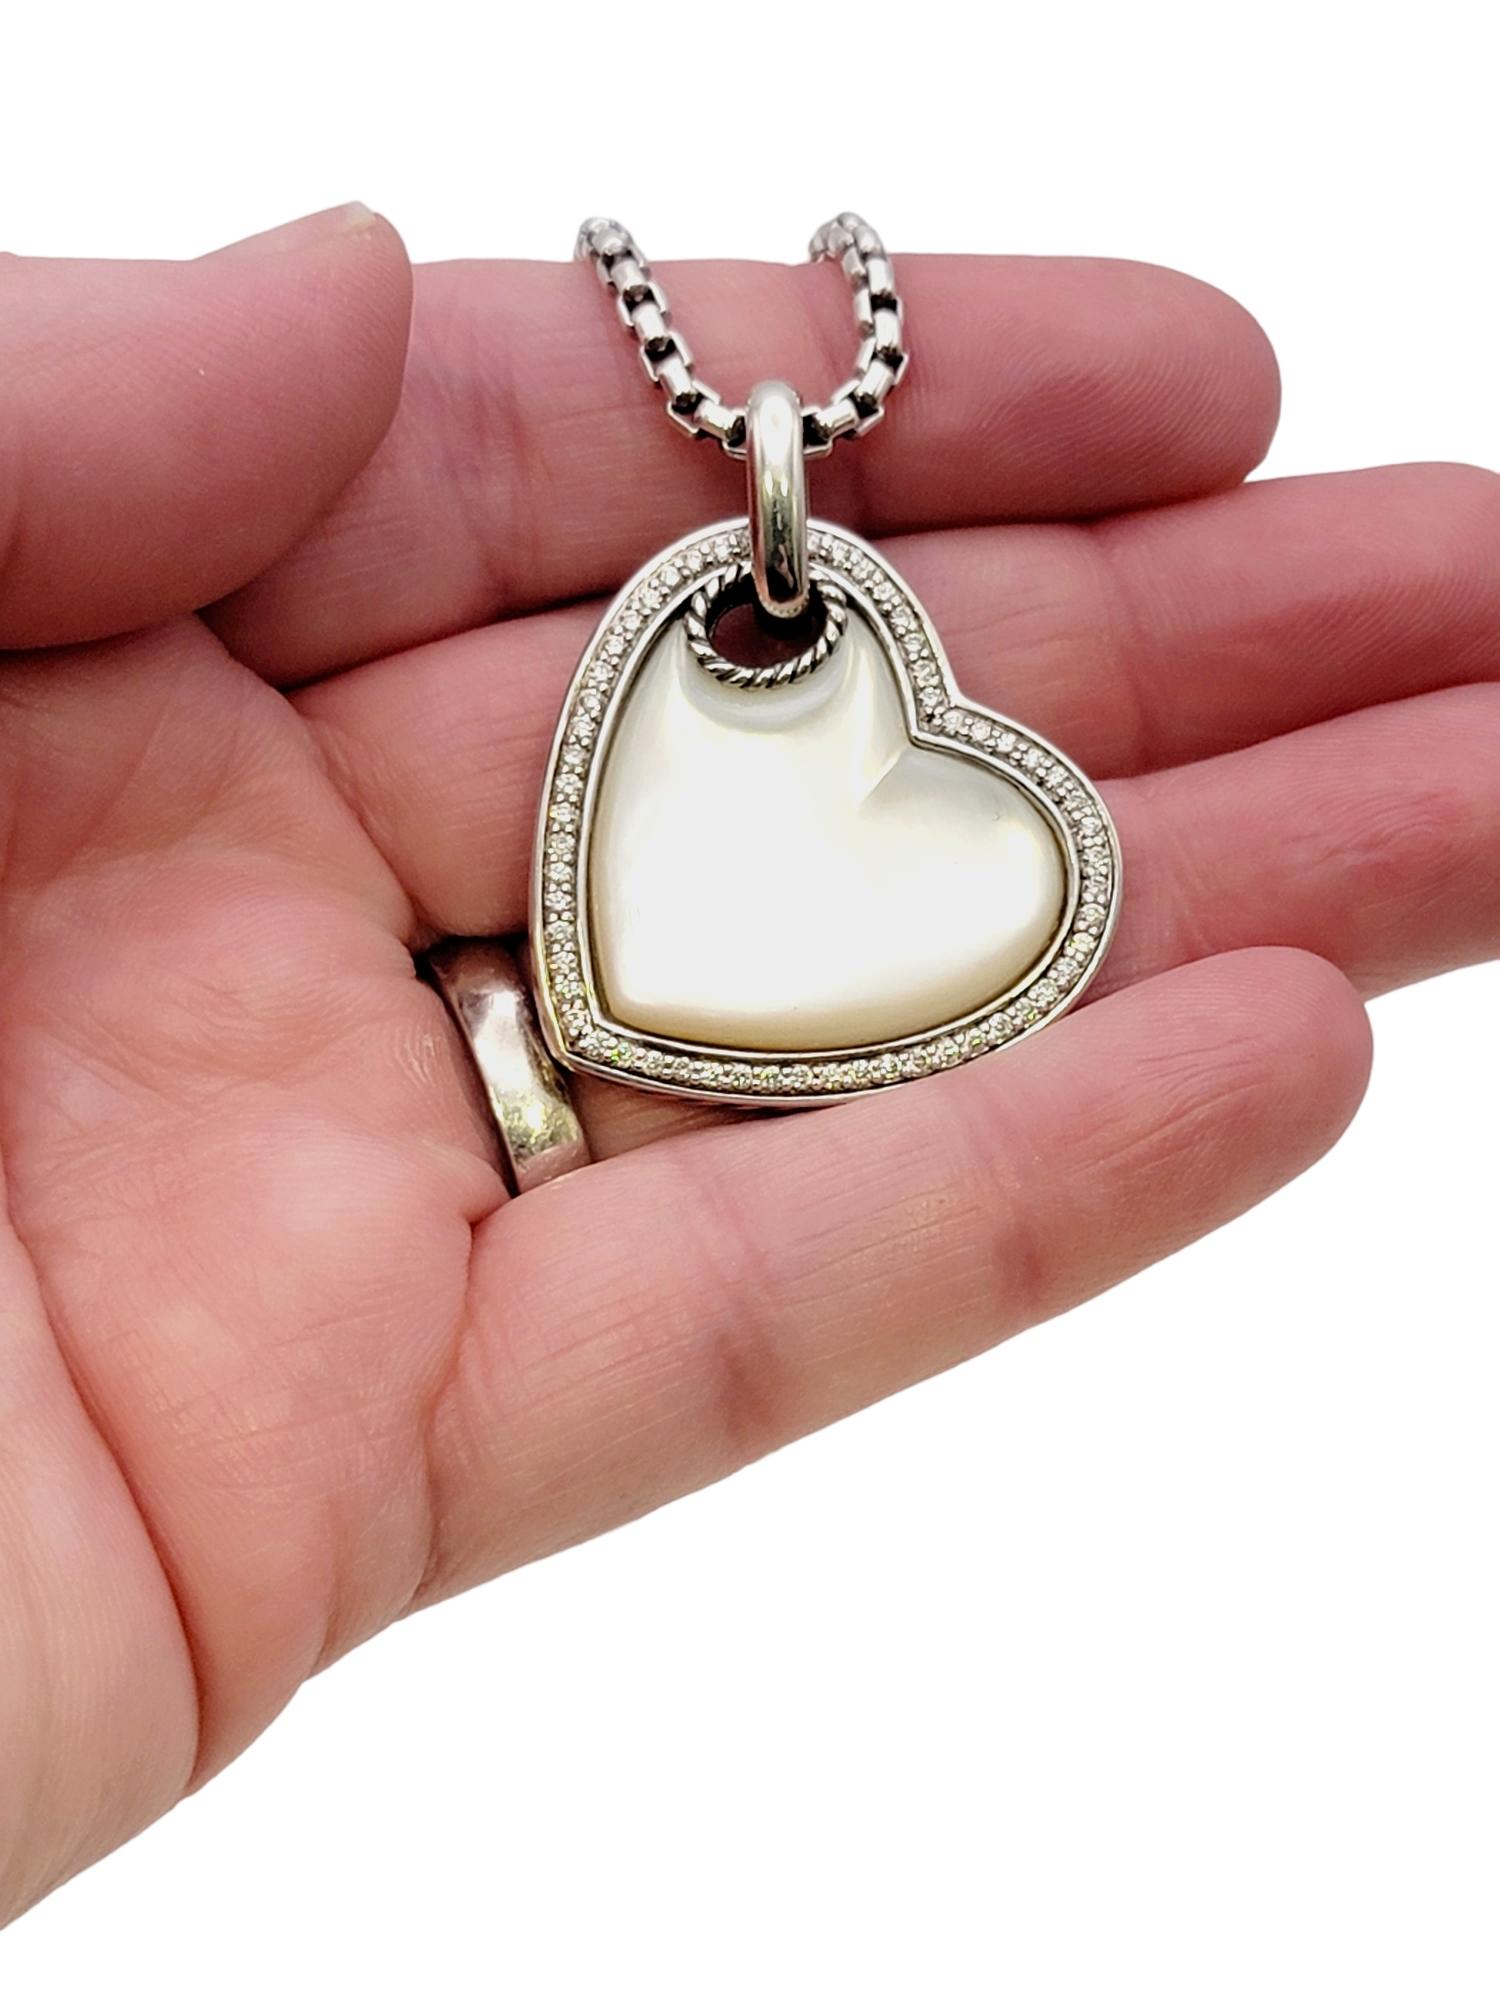 David Yurman Mother of Pearl and Diamond Heart Pendant Sterling Silver Necklace 3